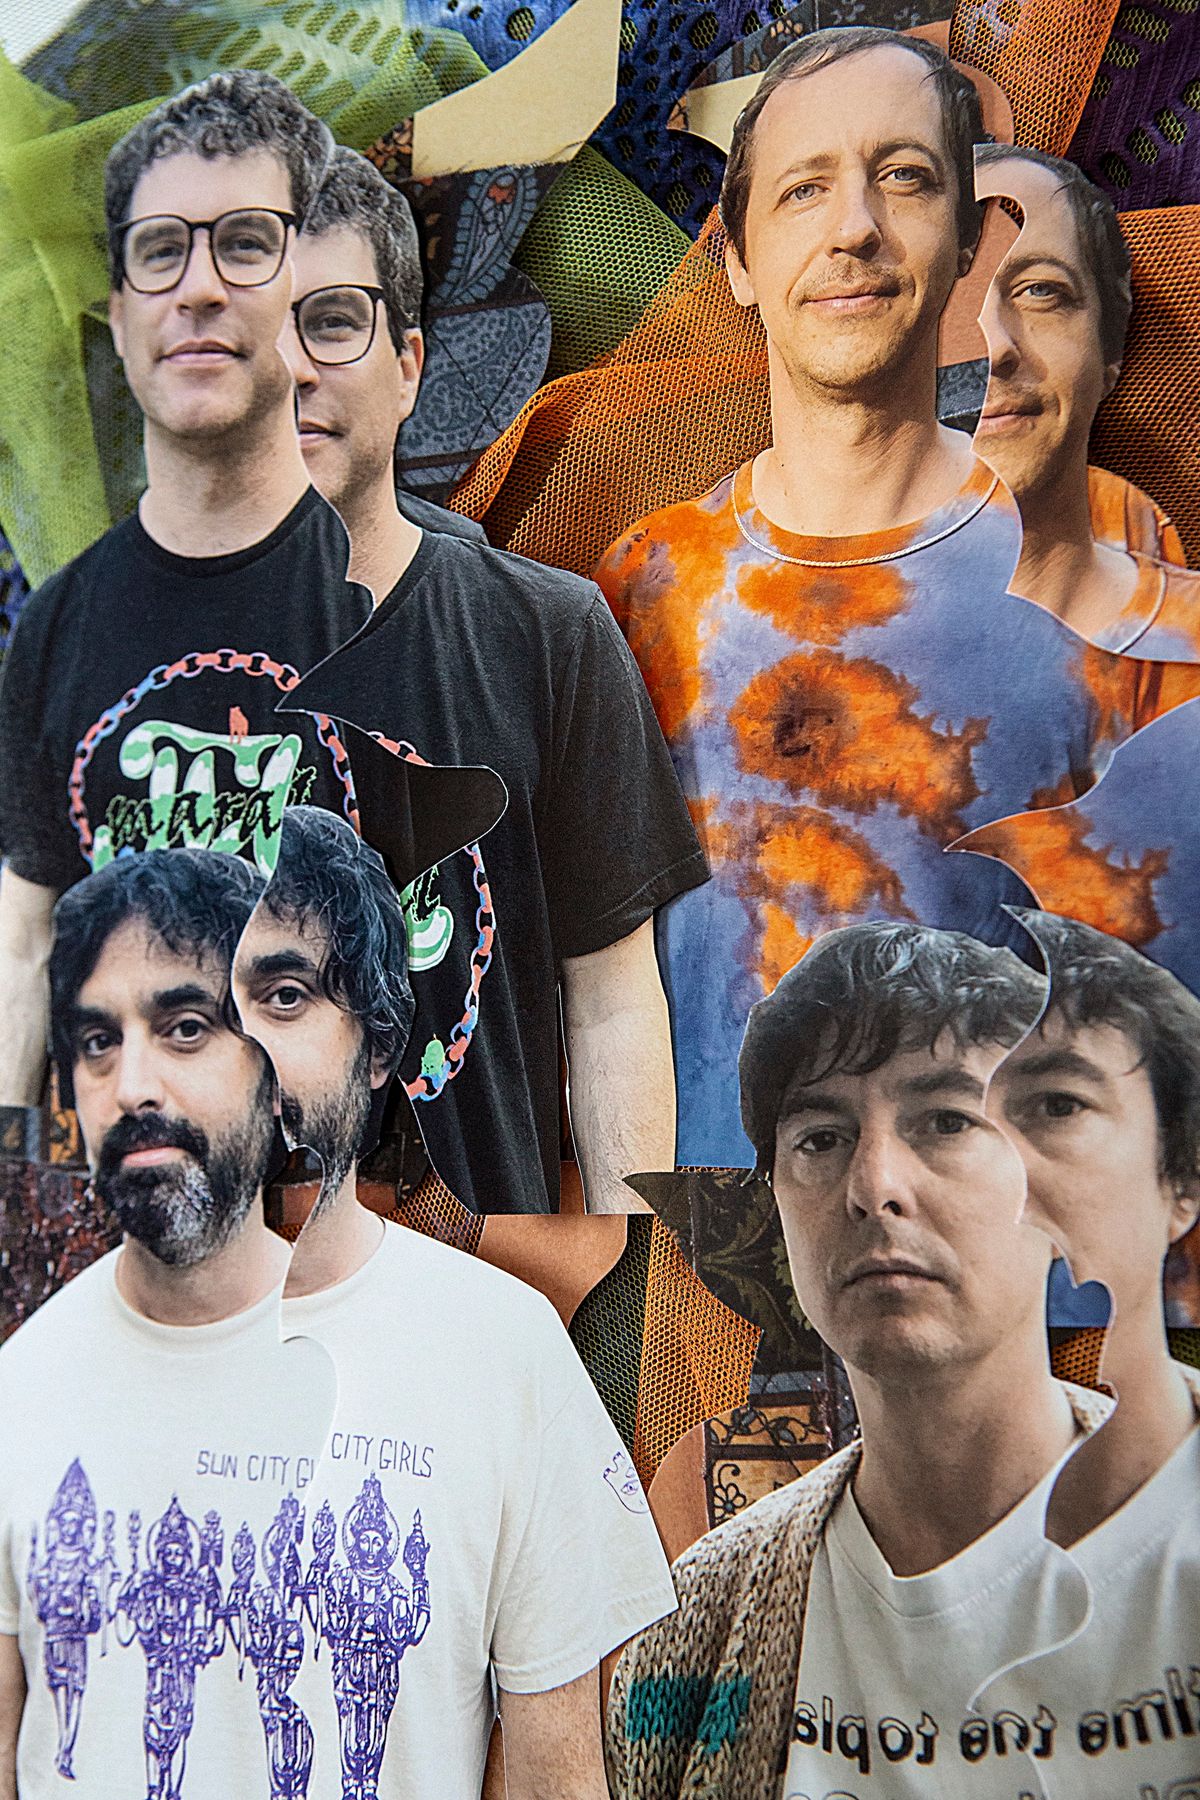 Animal Collective's Brian "Geologist" Weitz on Songcraft, Touring, Misconceptions, Money, and Passing Music Down